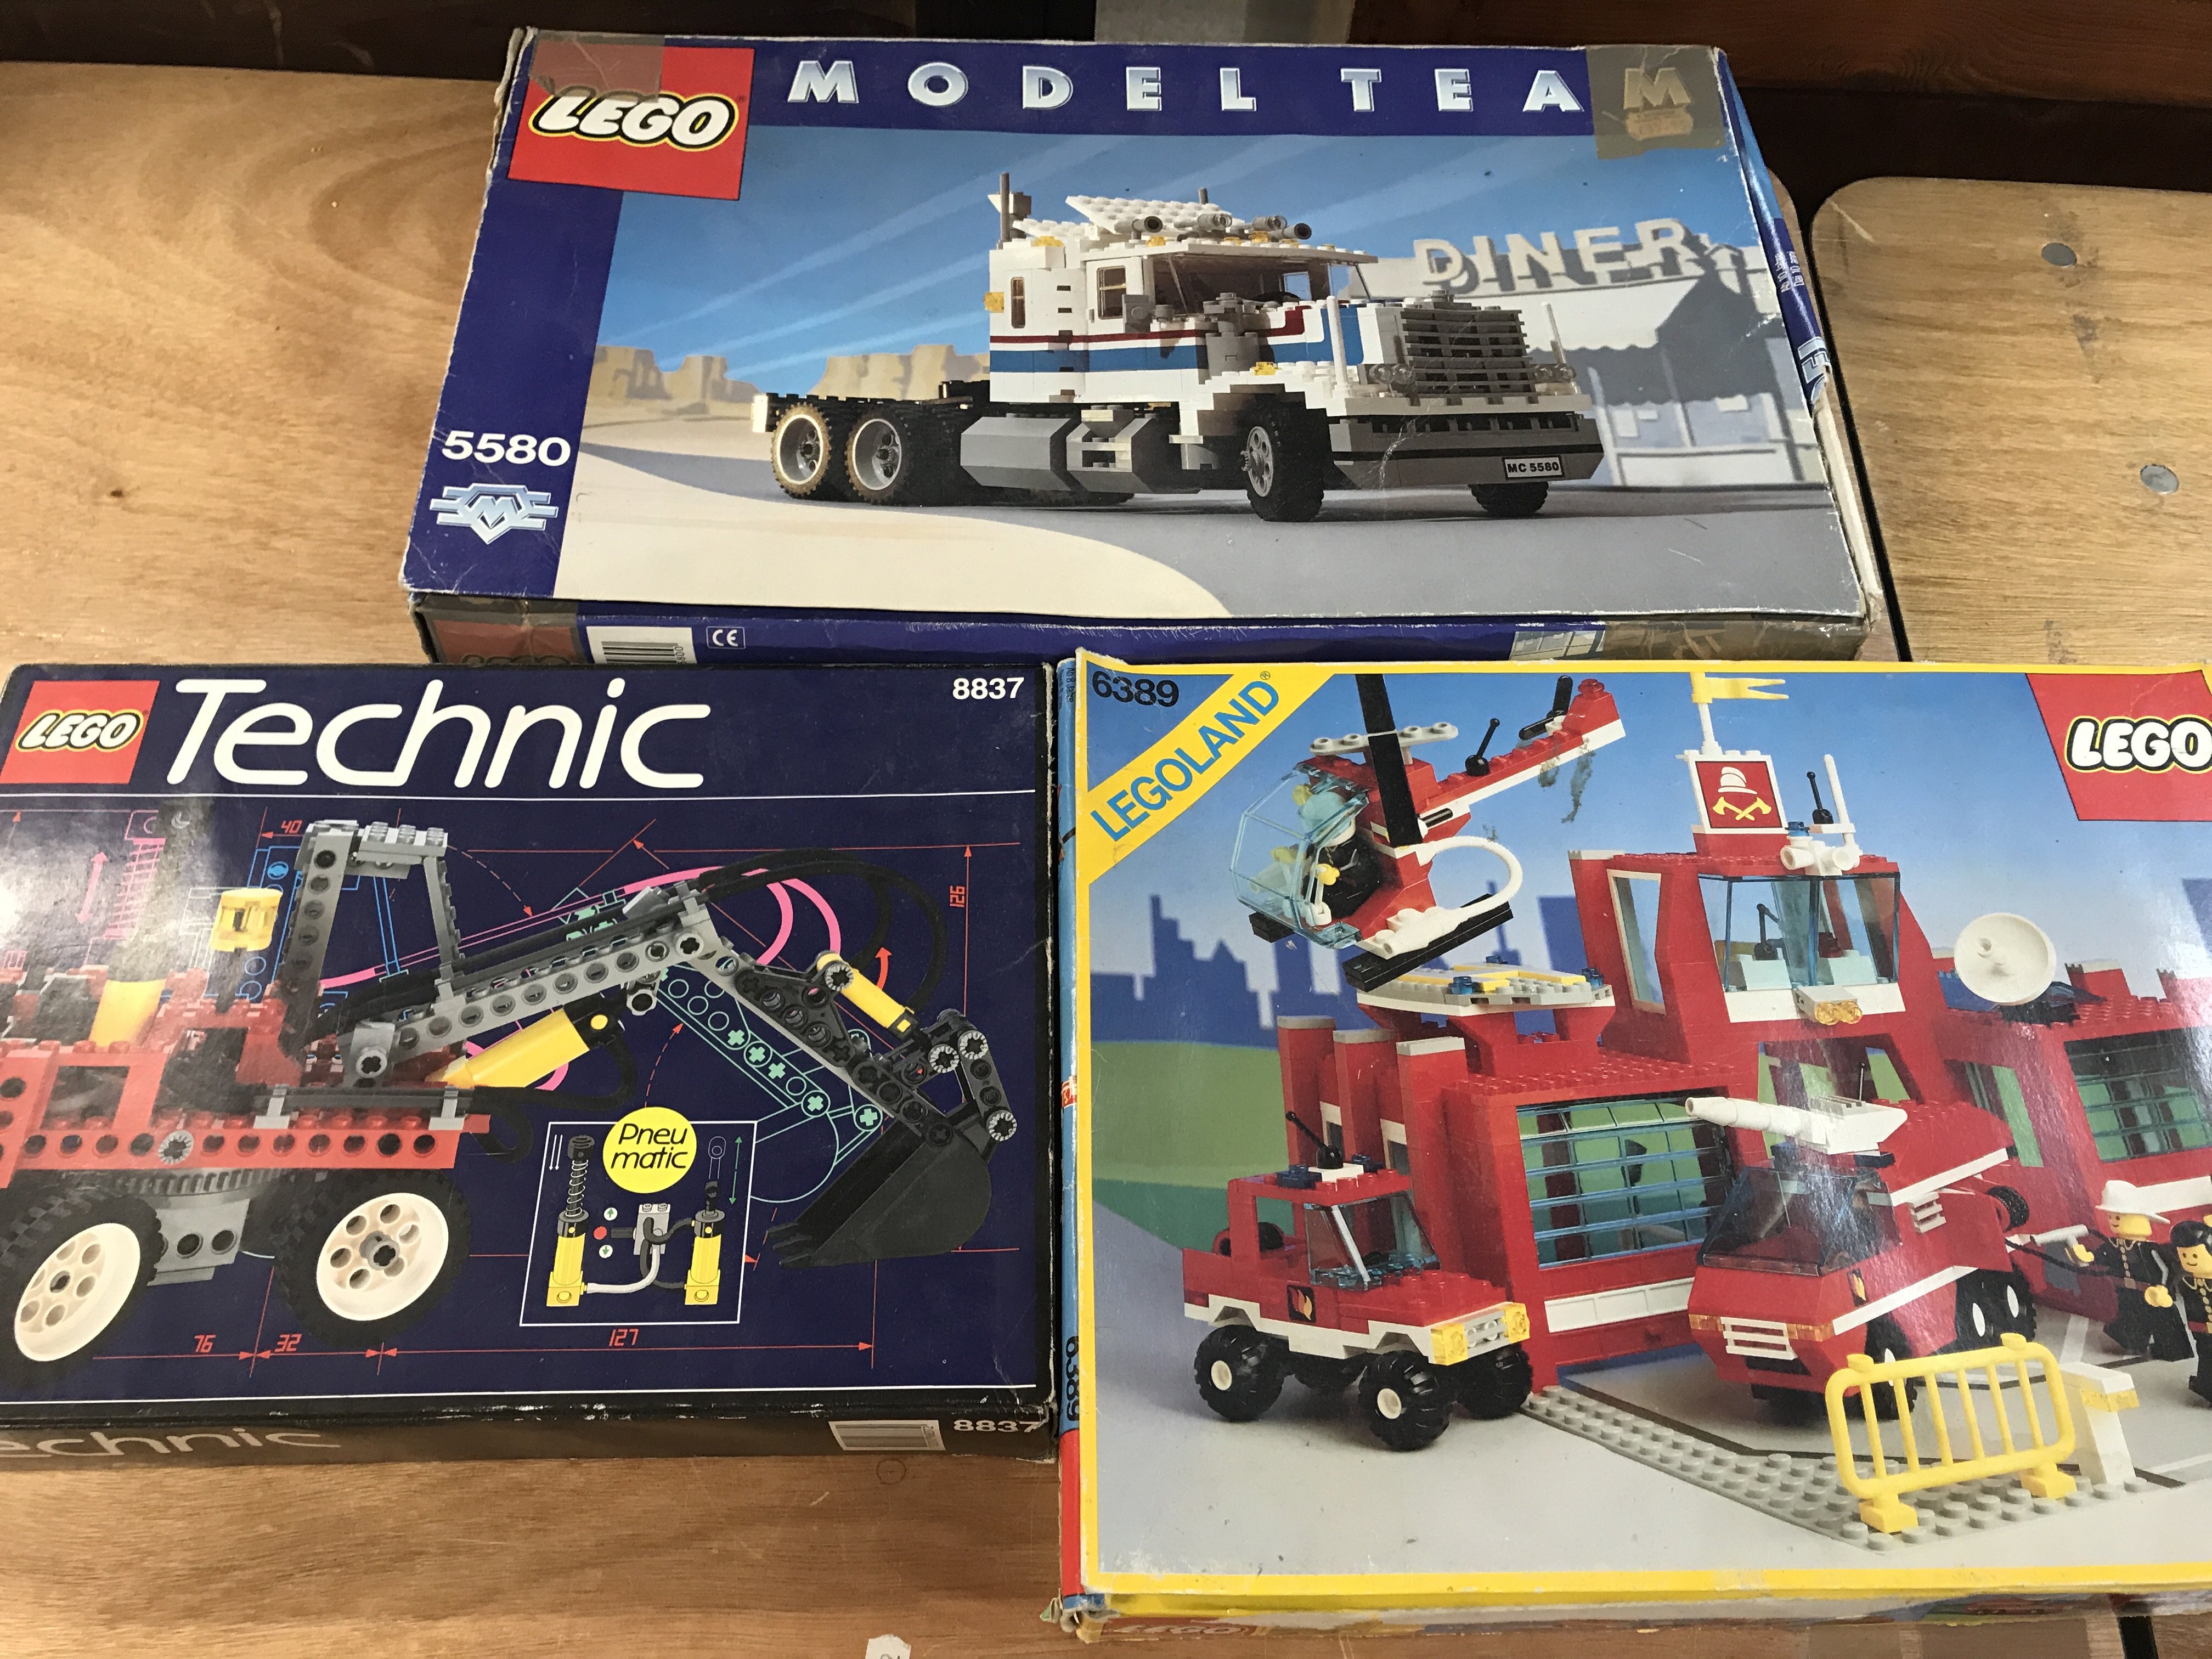 Lego sets , boxed, unchecked, sets Model team #5580, Technic #8837 and #6389 Fire station